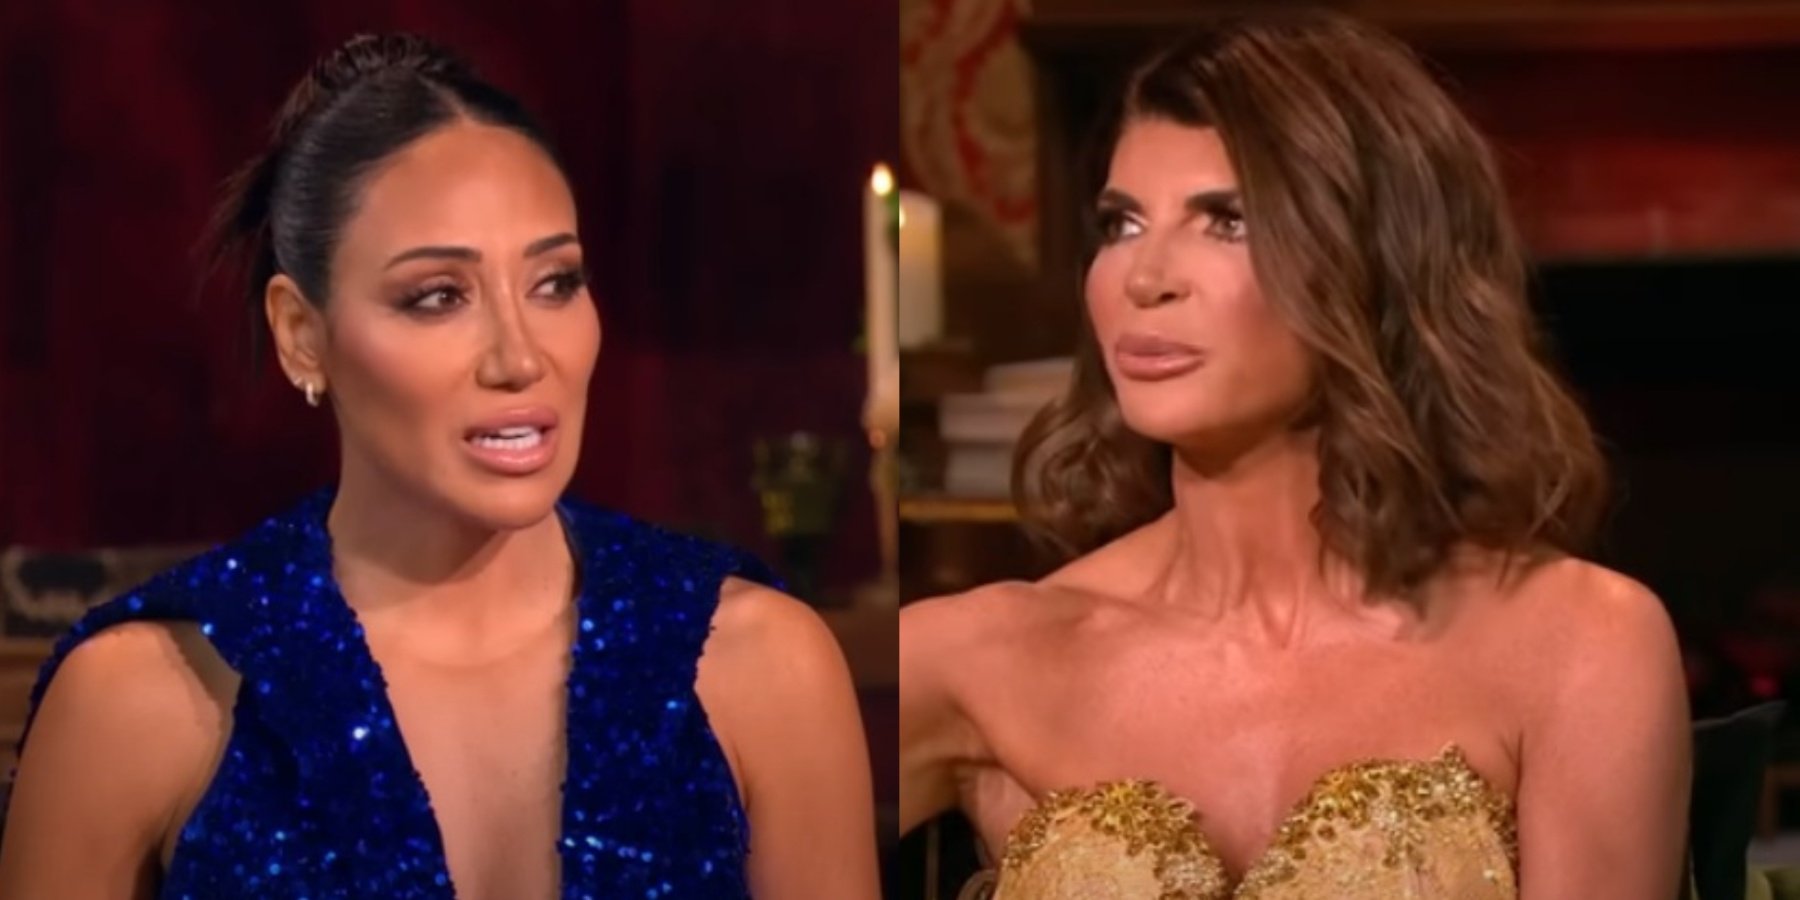 'Real Housewives of New Jersey' stars Melissa Gorga and Teresa Giudice photographed during the season 13 reunion special.